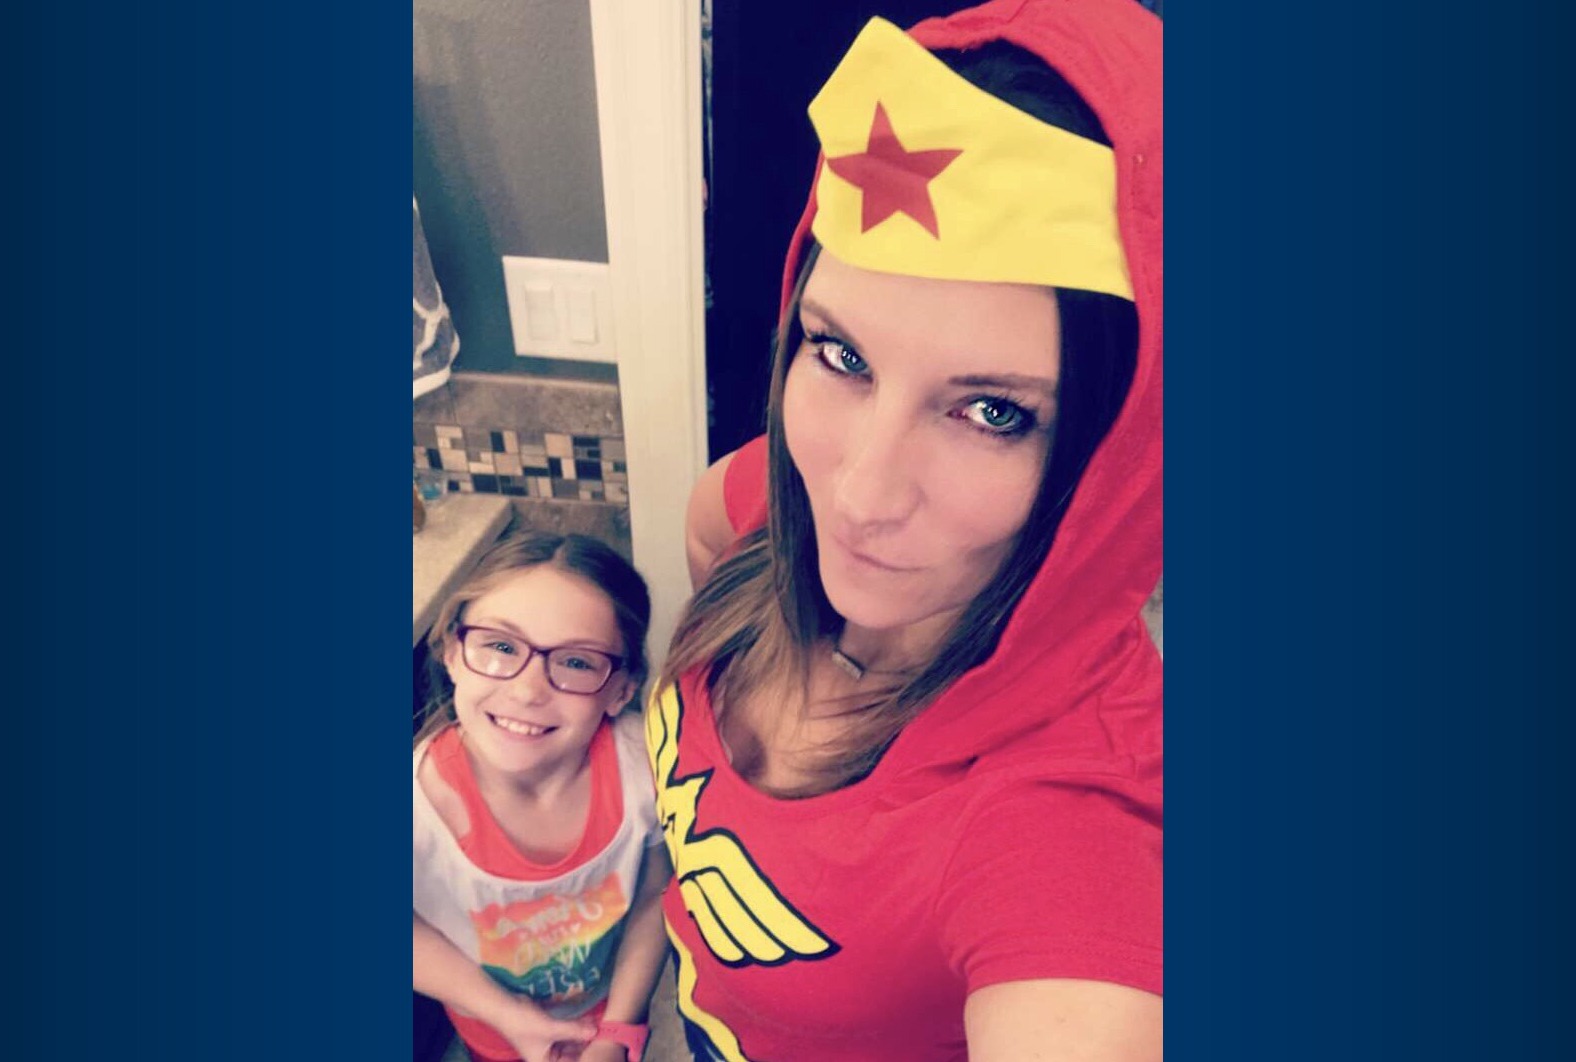 Kunkel wearing a Wonder Woman outfit for Halloween after learning of her breast cancer diagnosis, with her daughter.